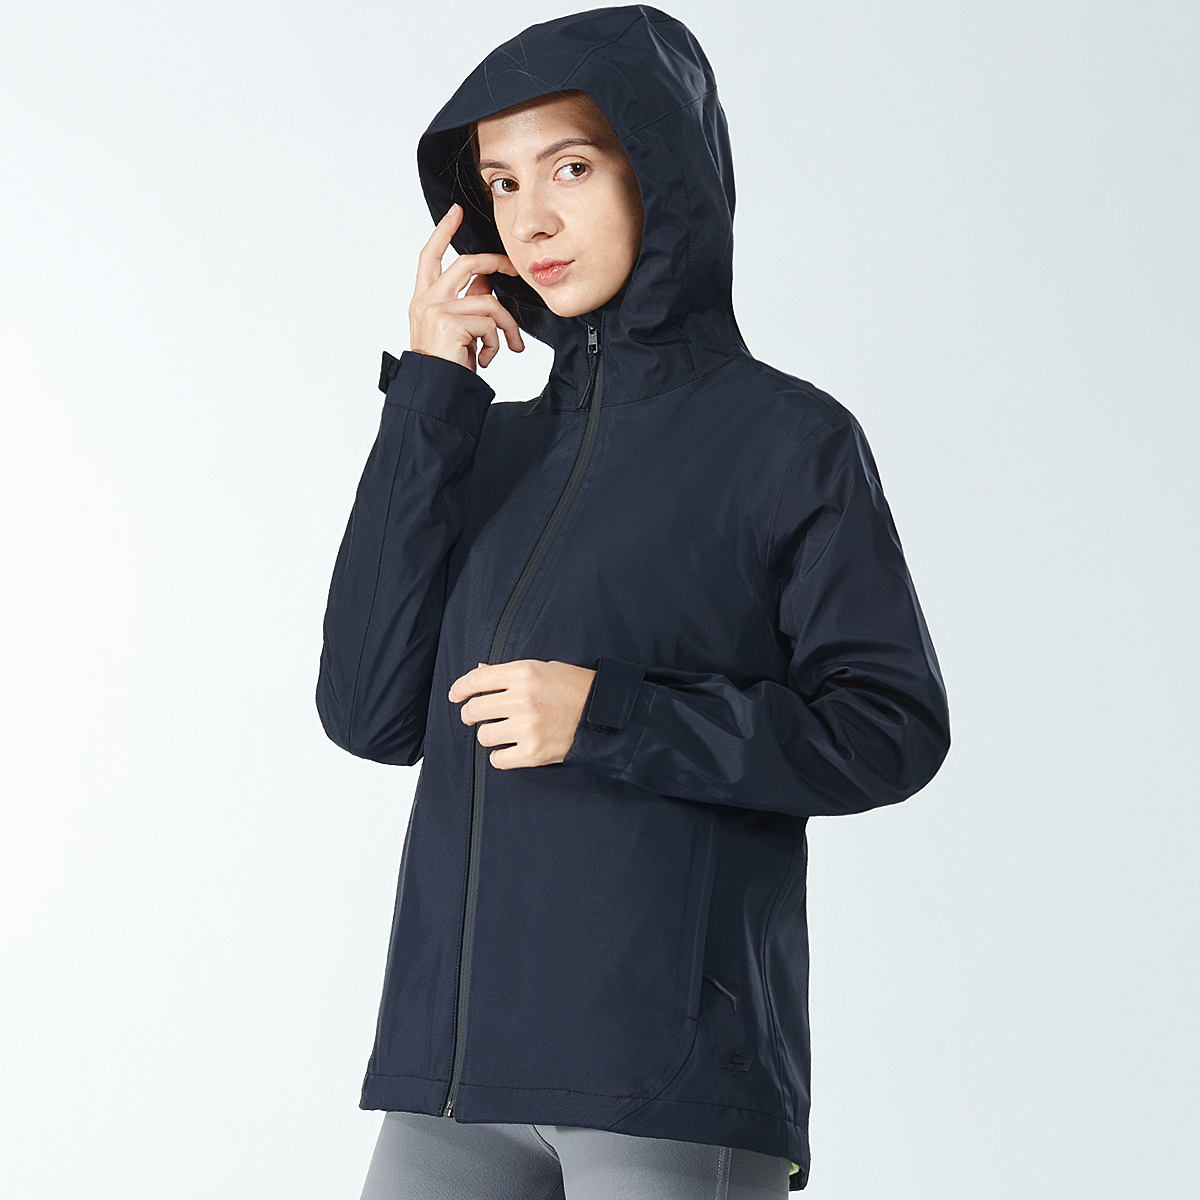 Gymax Women' Waterproof Jacket Hooded Coat w/Cuff Camping Navy Size L - image 3 of 10